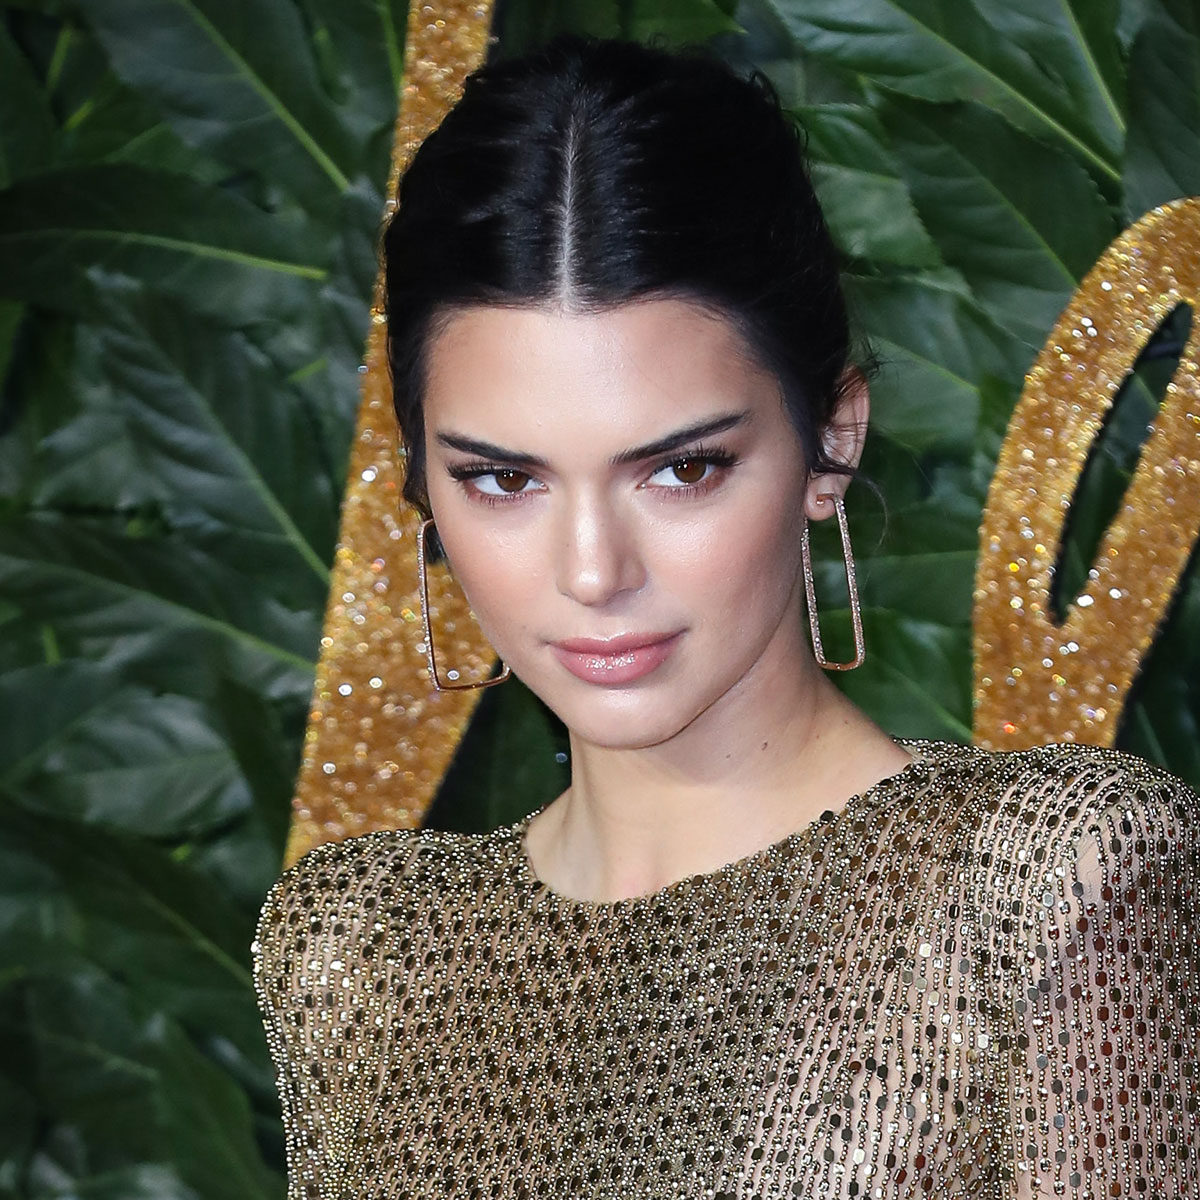 Kendall Jenner went out wearing no pants, and it's a huge vibe